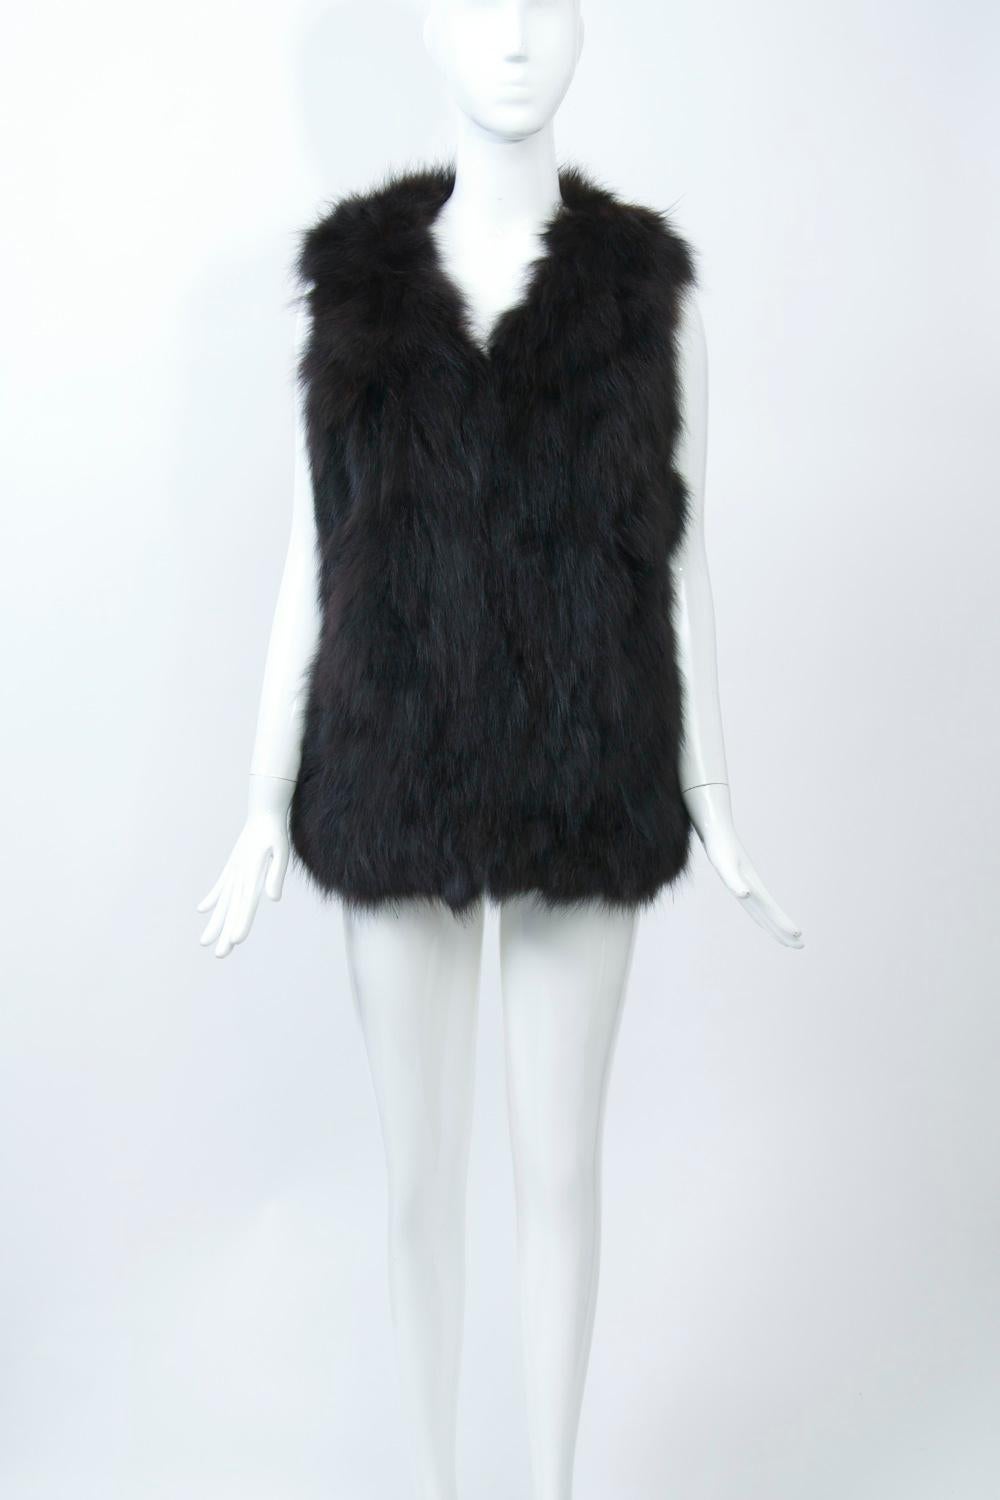 Dark brown pieced fur vest in either dyed fox or opposum with fur-hook closures and featuring a red lining. Easy to wear. Size S.